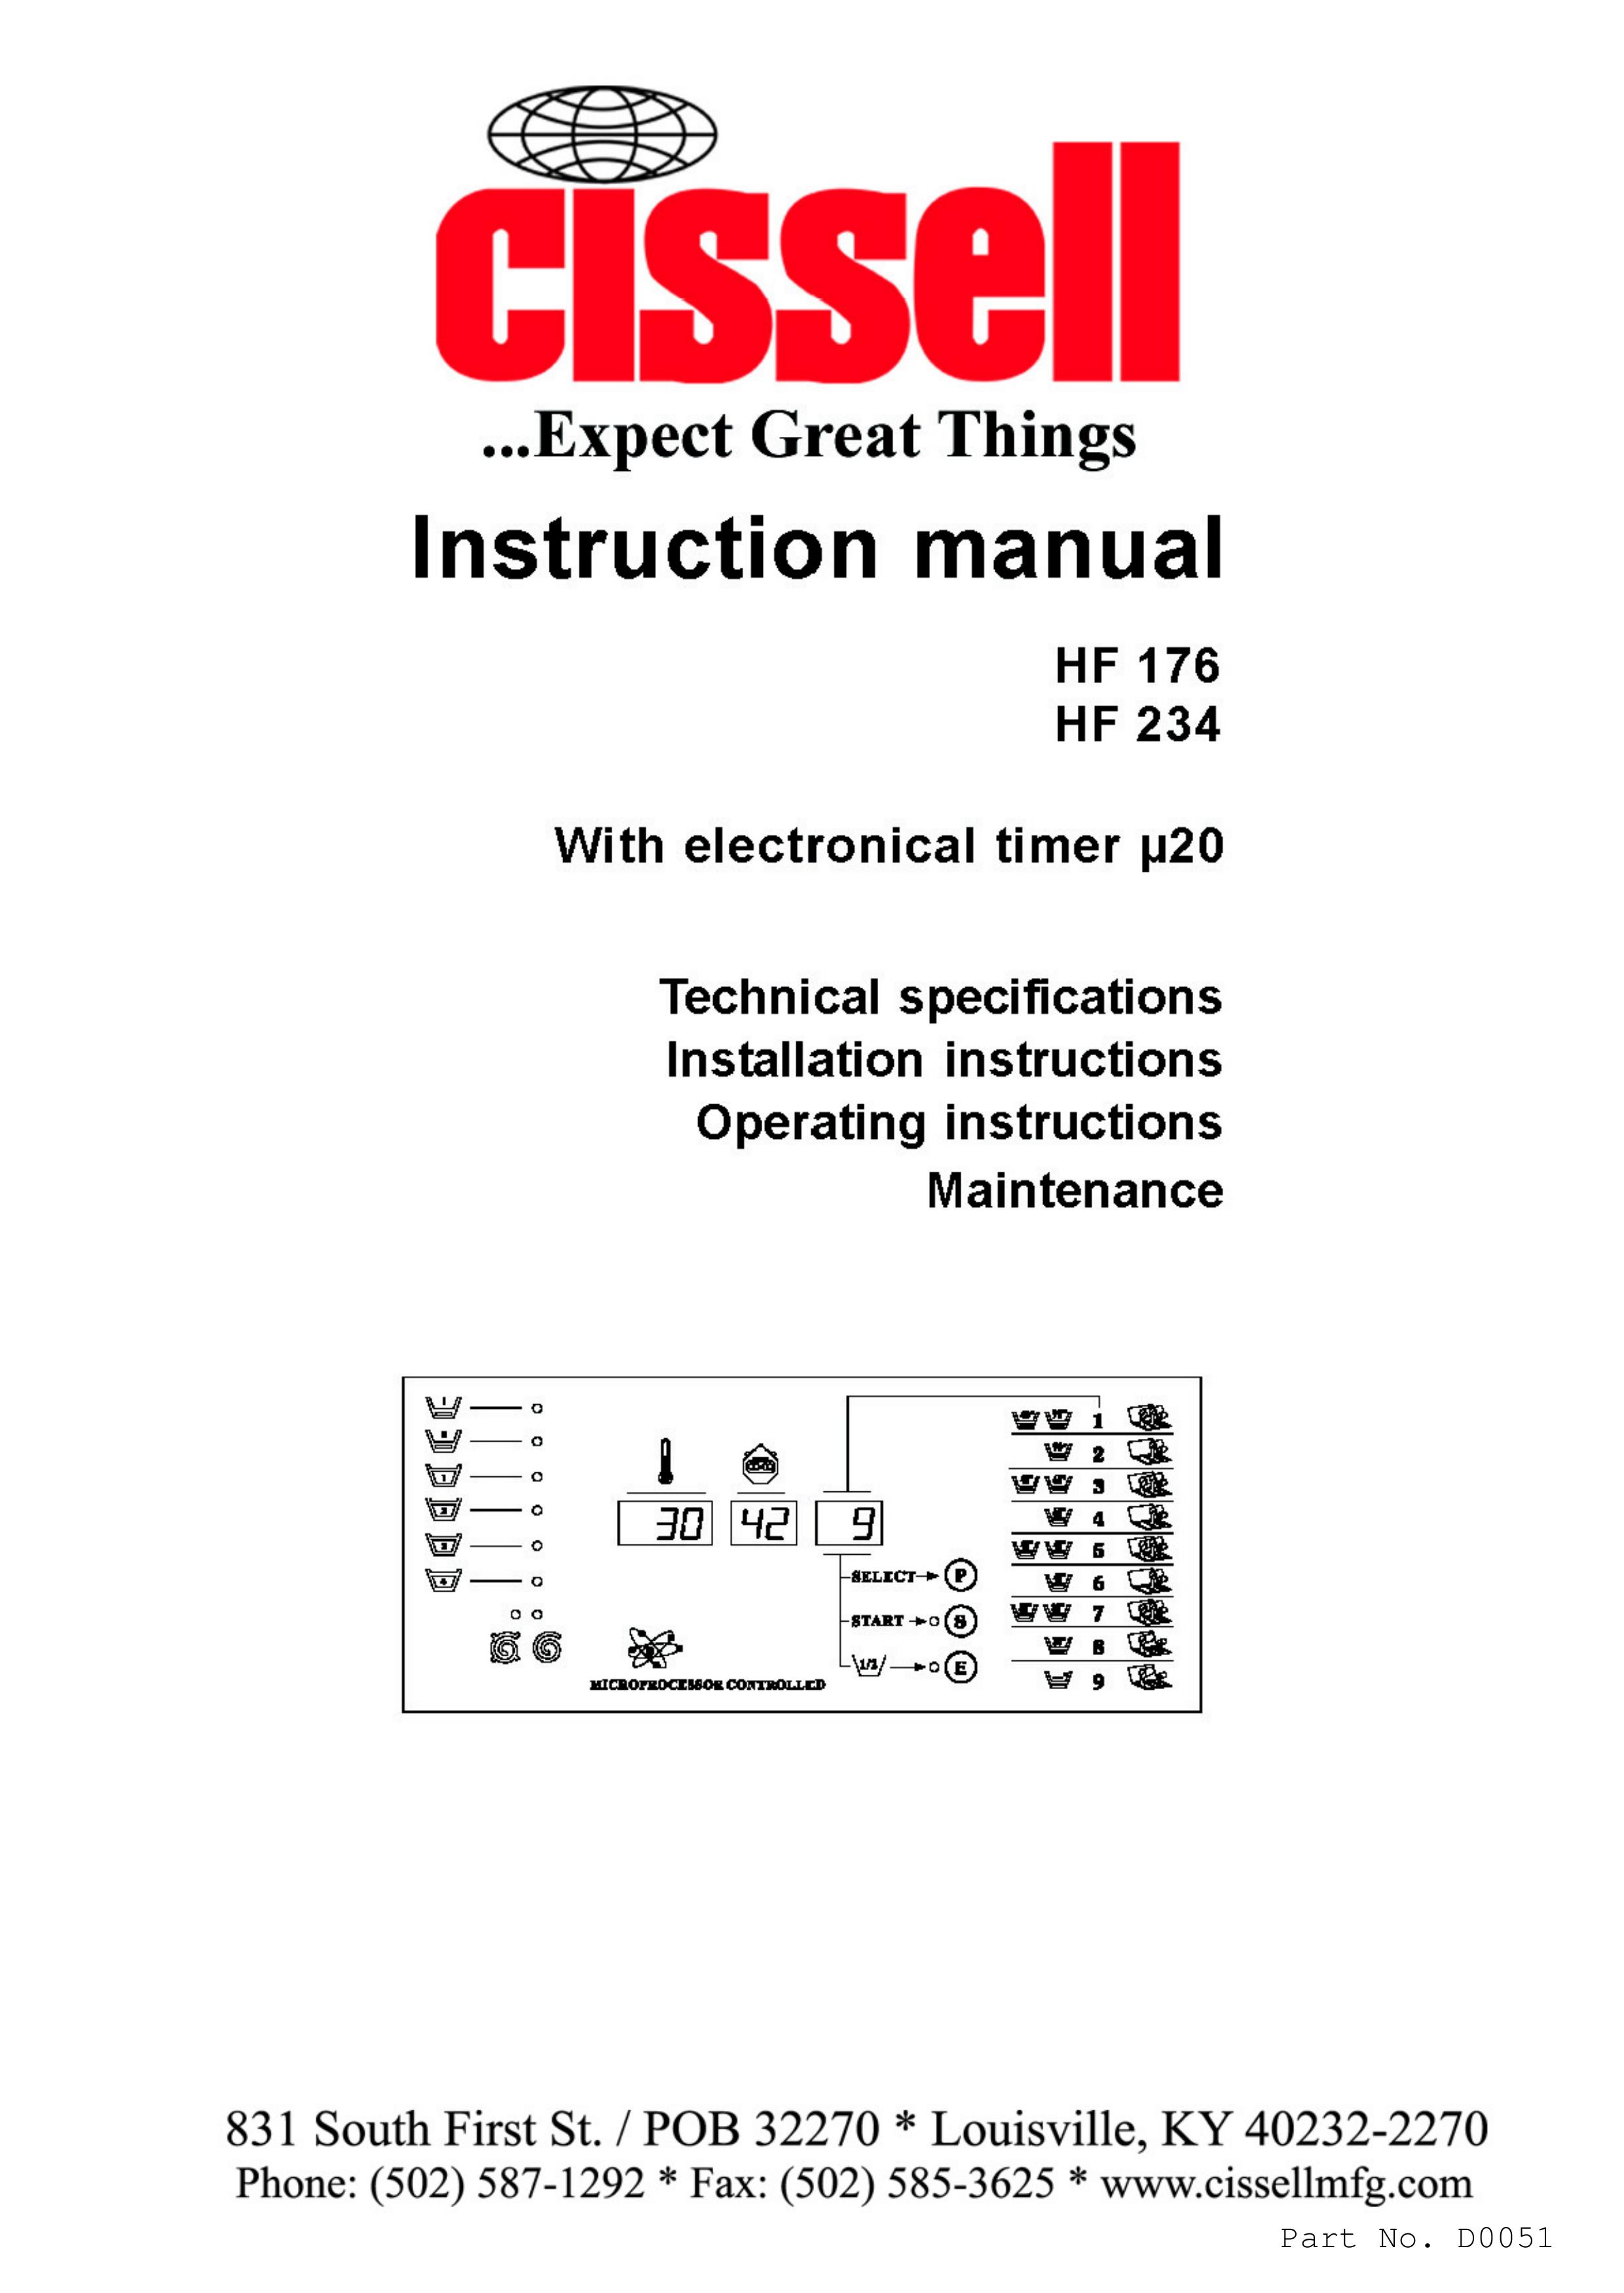 Cissell HF 234 Washer User Manual